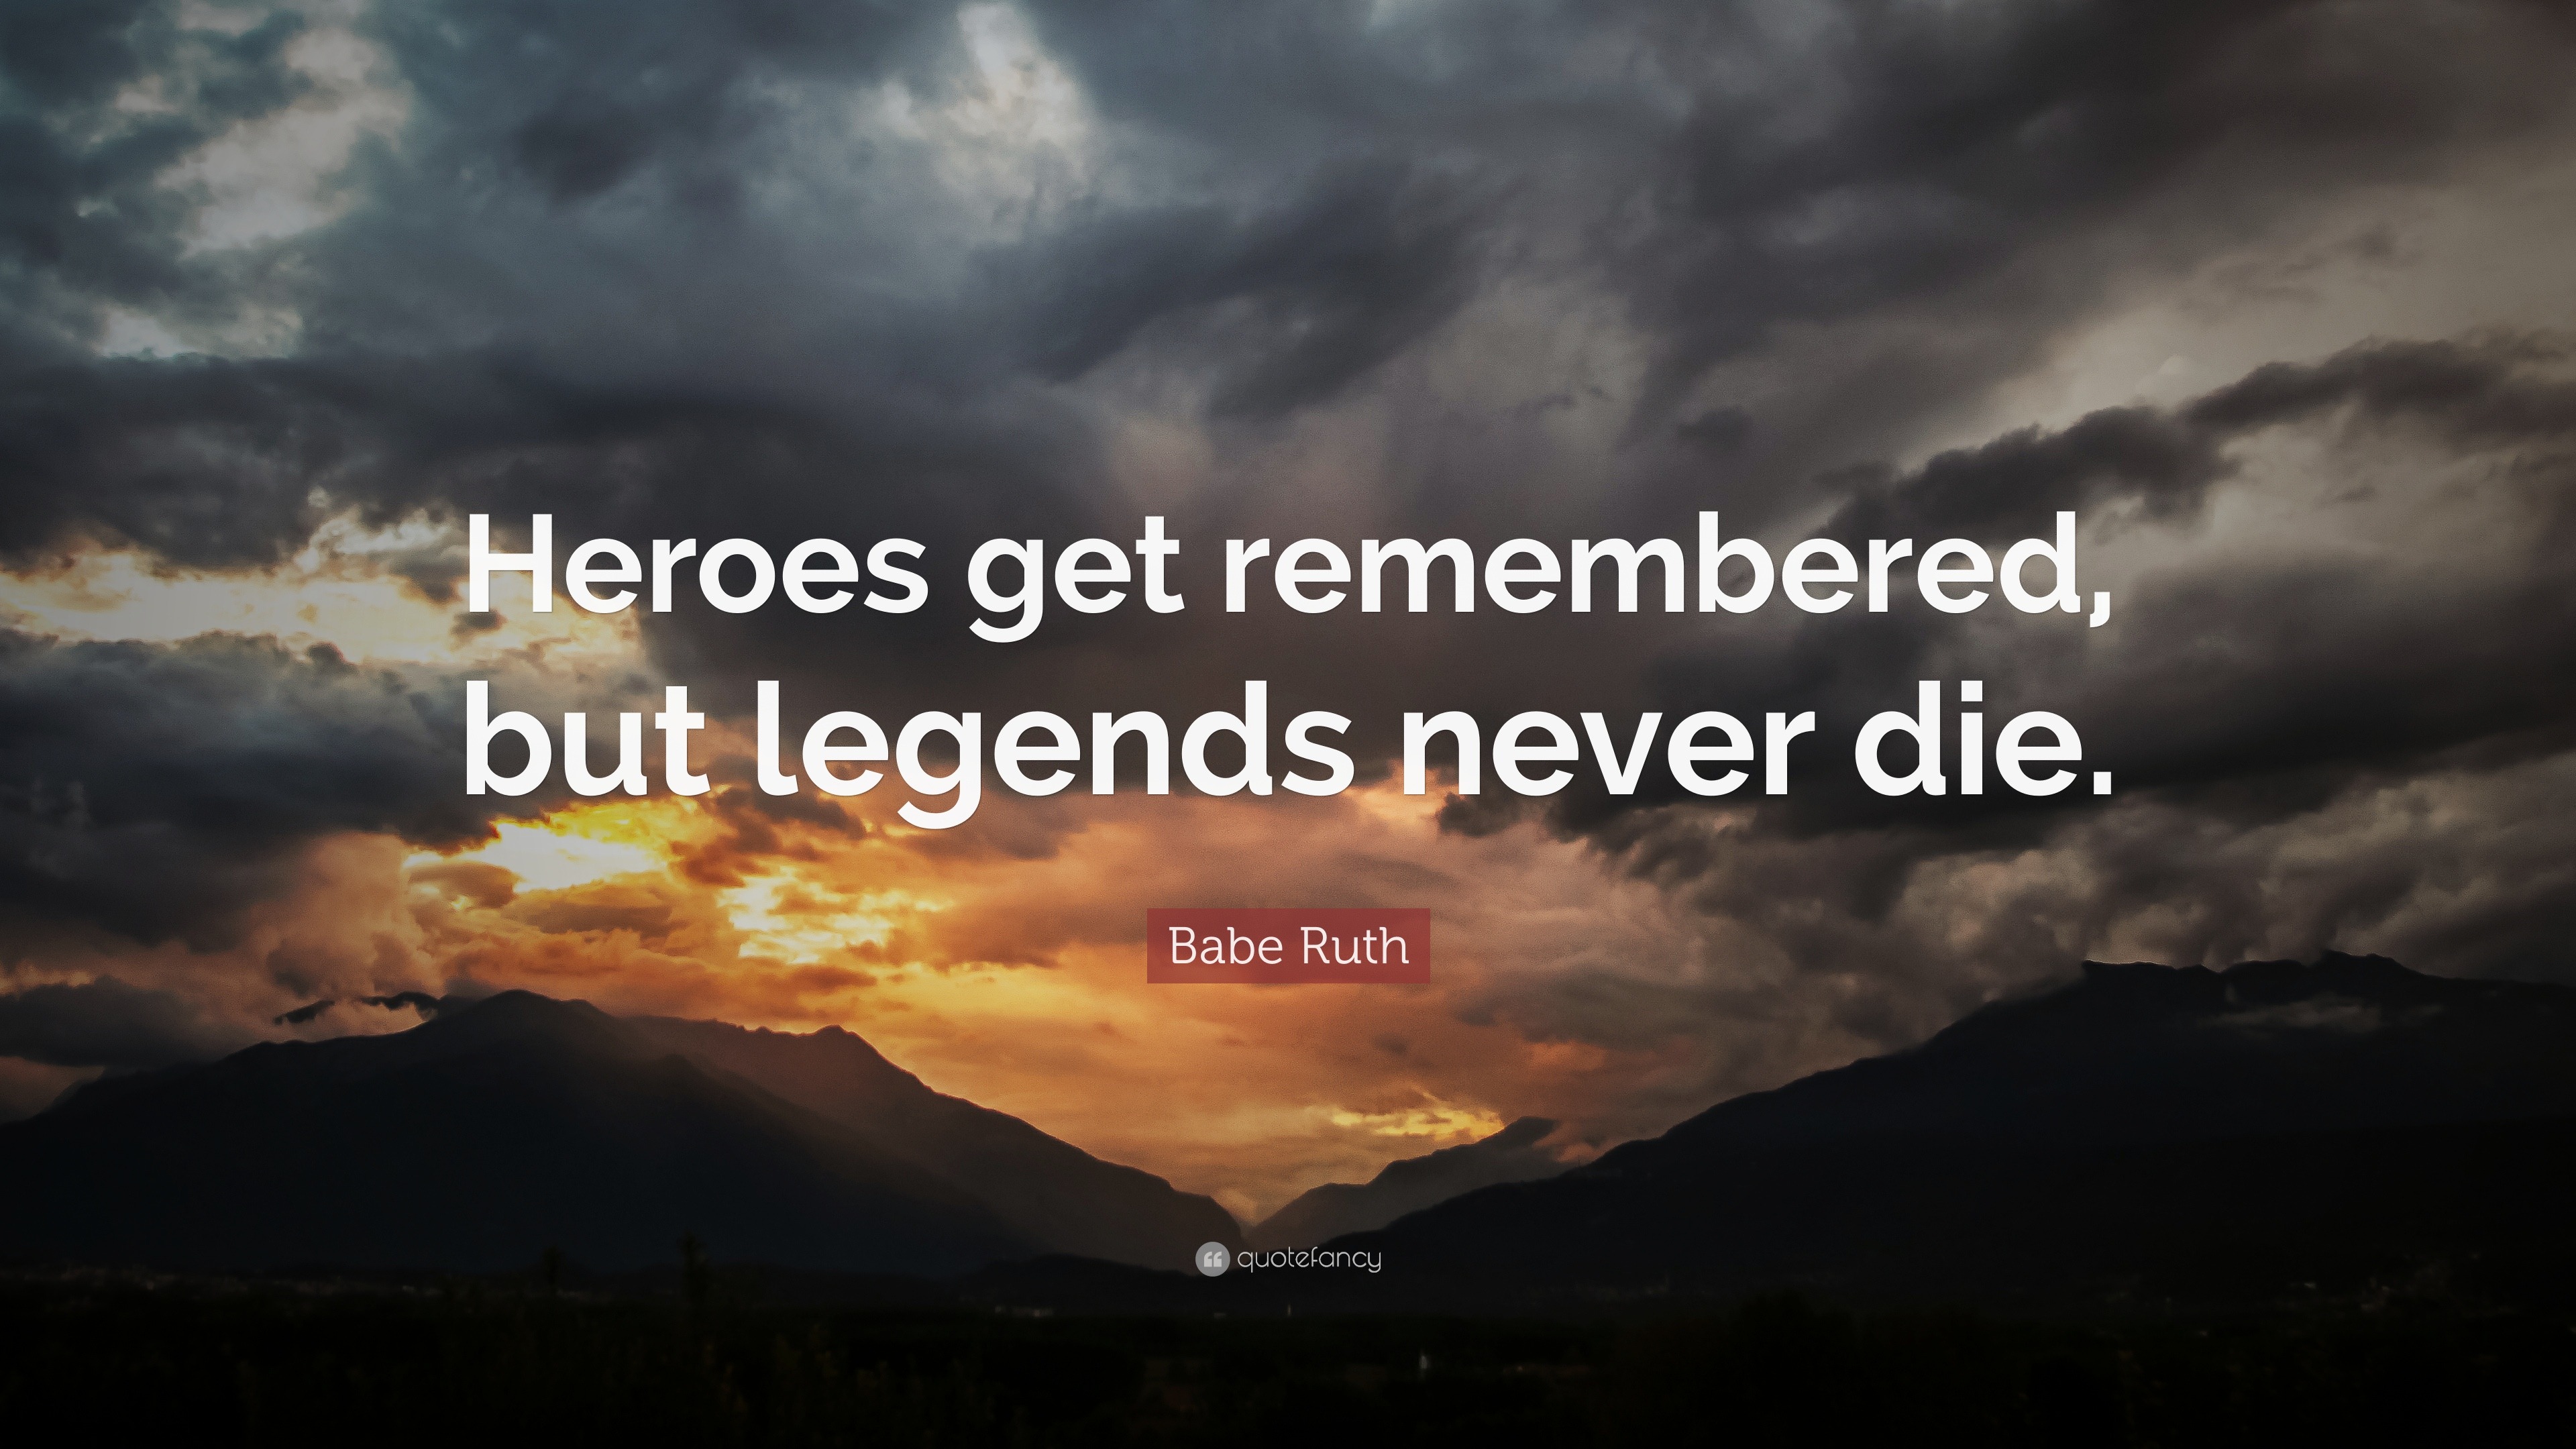 Babe Ruth Quote: “Heroes get remembered, but legends never die.” (21